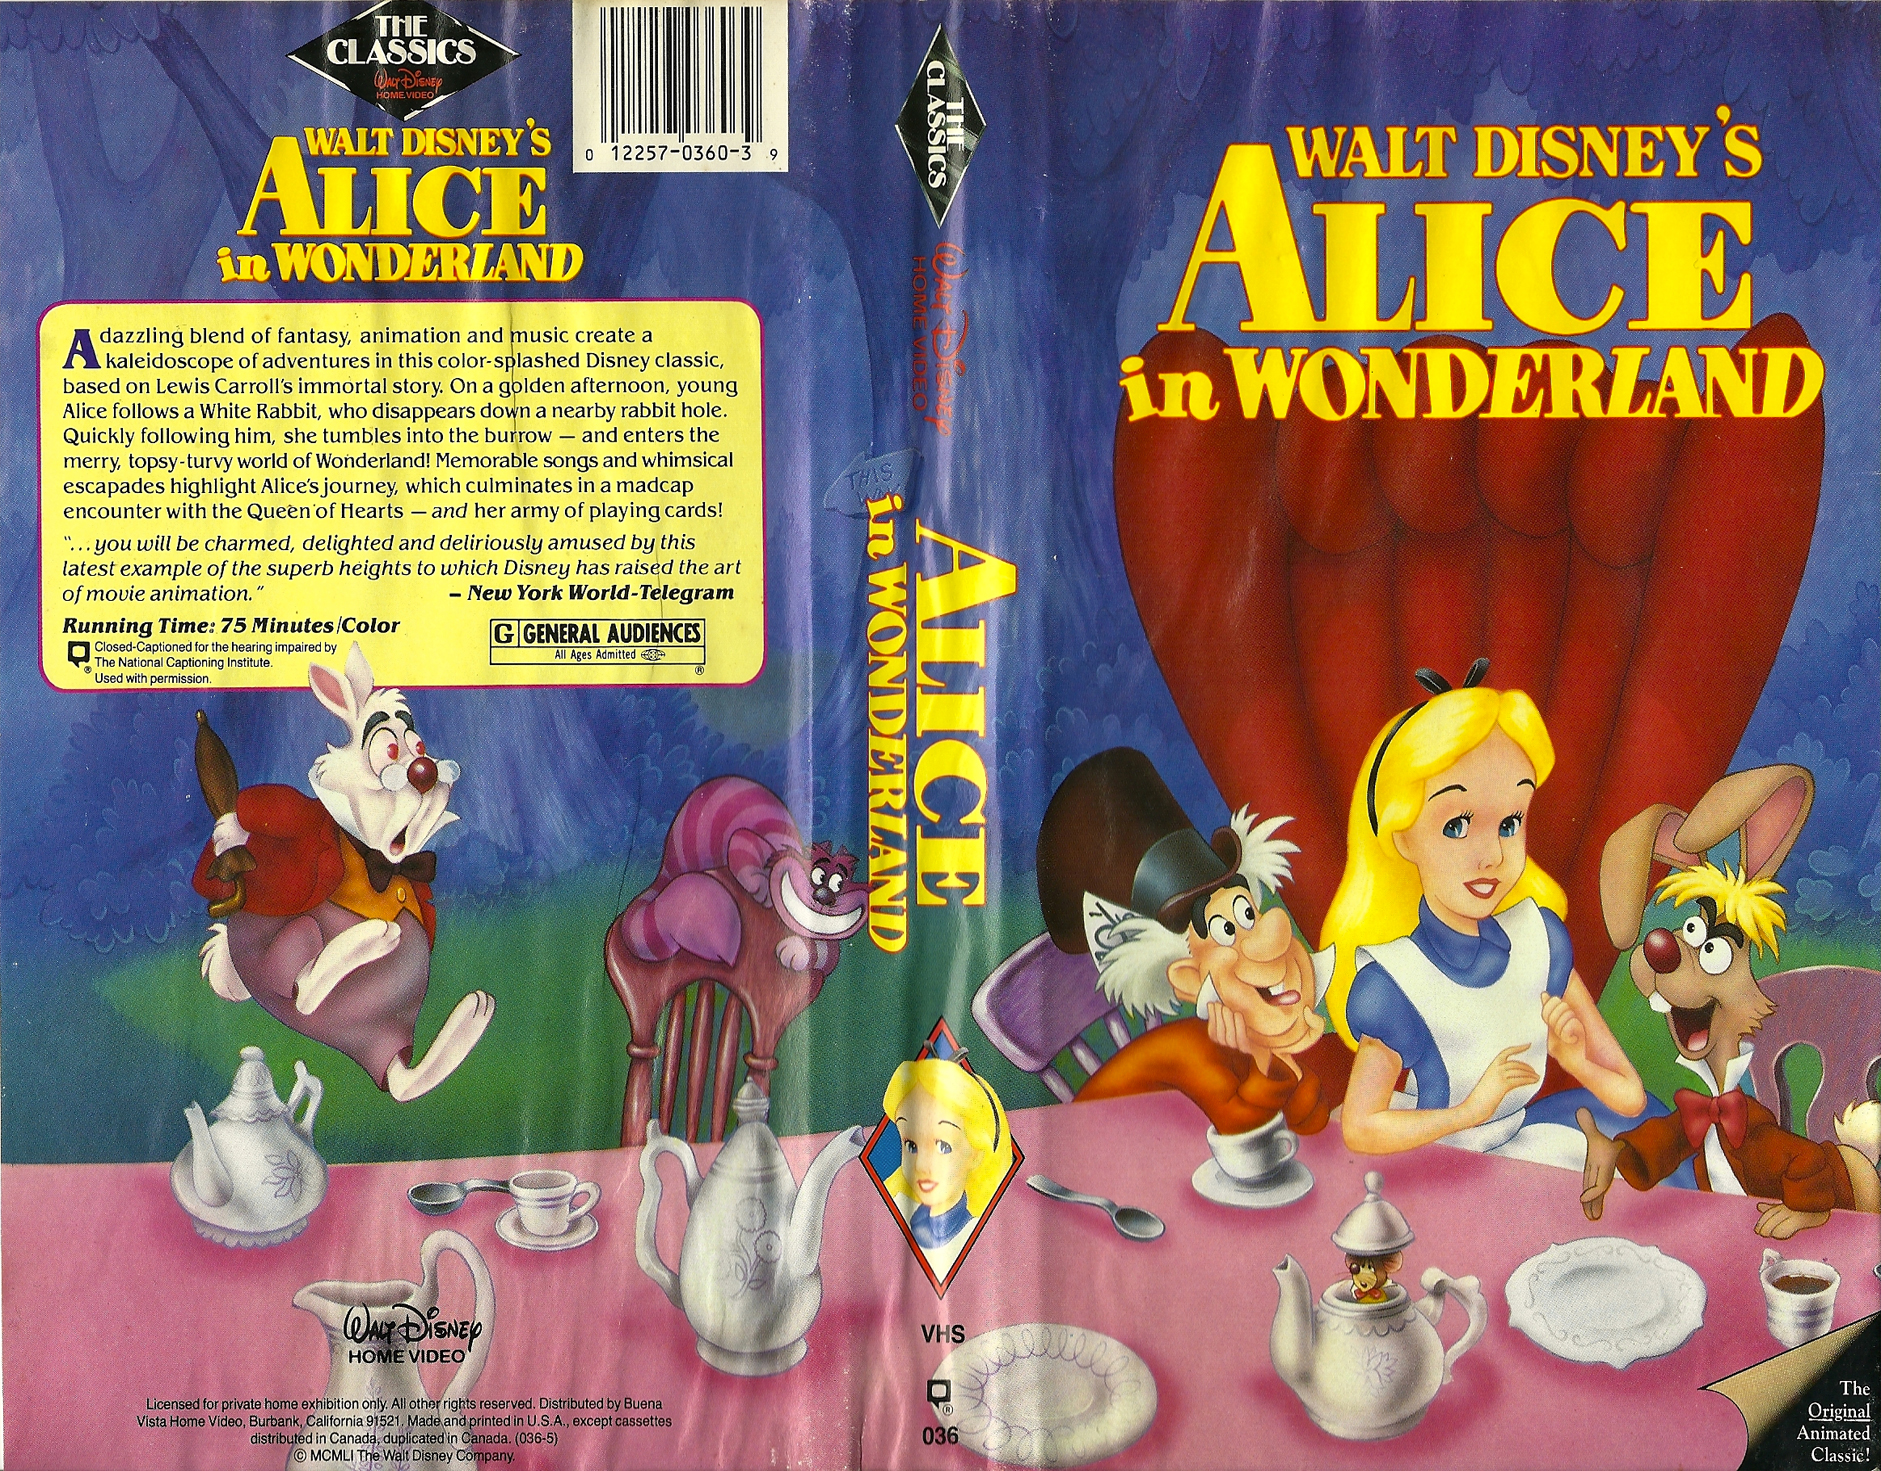 May 13 2011 VHS cover scan - click for high res version alice in wonderland.